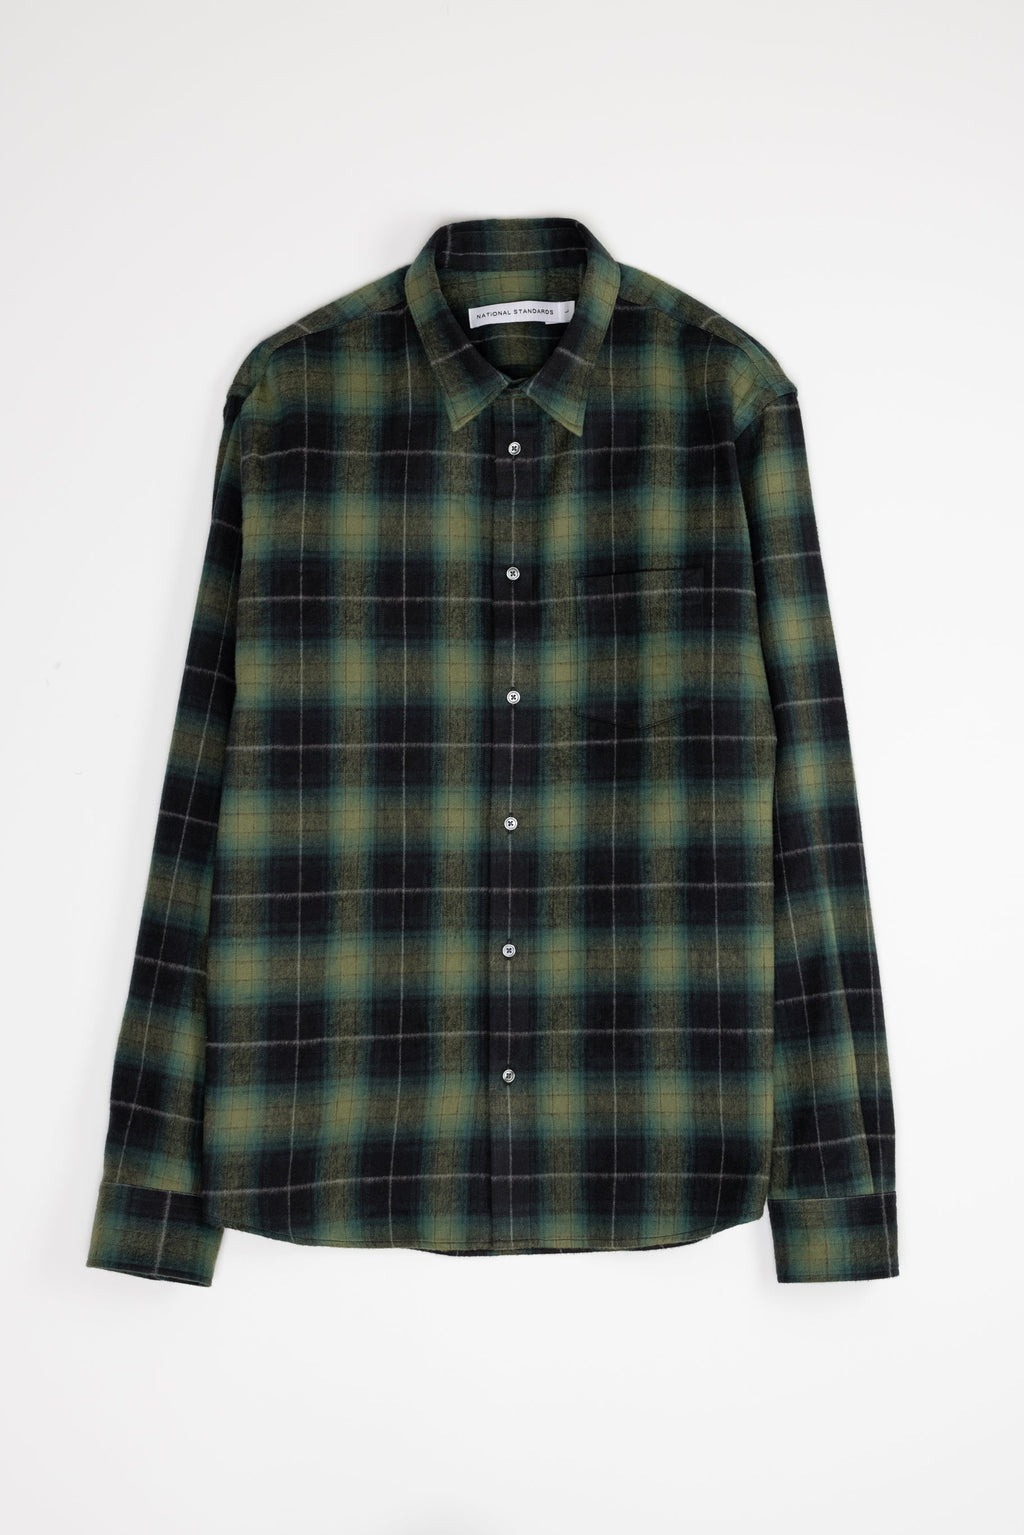 Japanese Shaggy Plaid in Green and Navy 01